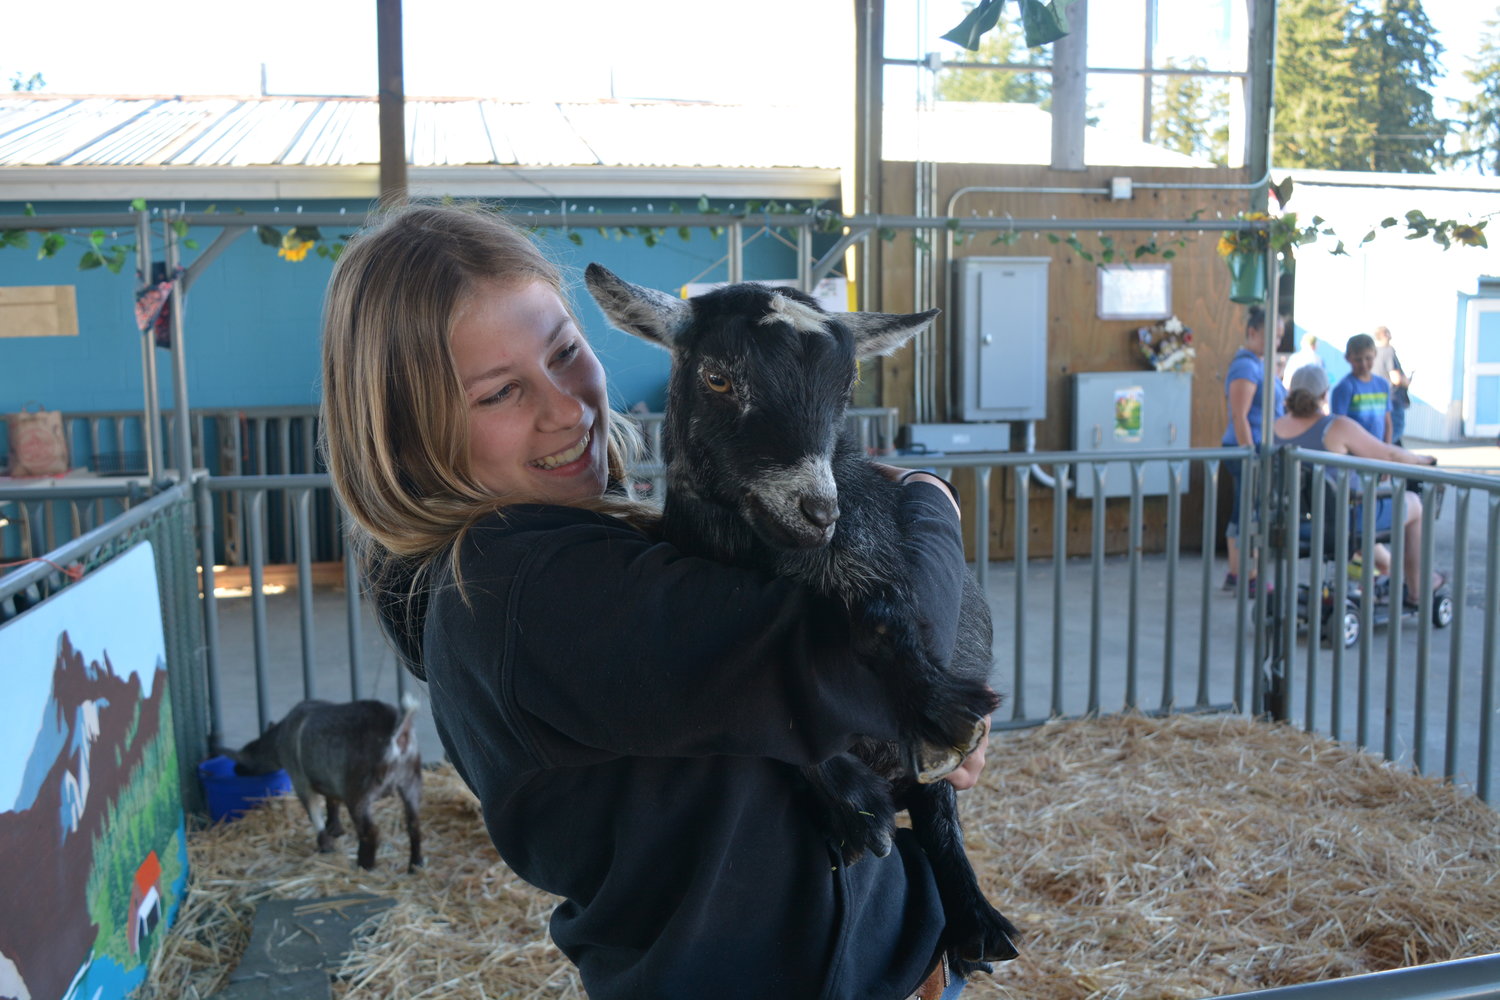 Bella Parke holds a goat in her arms at the Clark County Fair on Aug. 5.